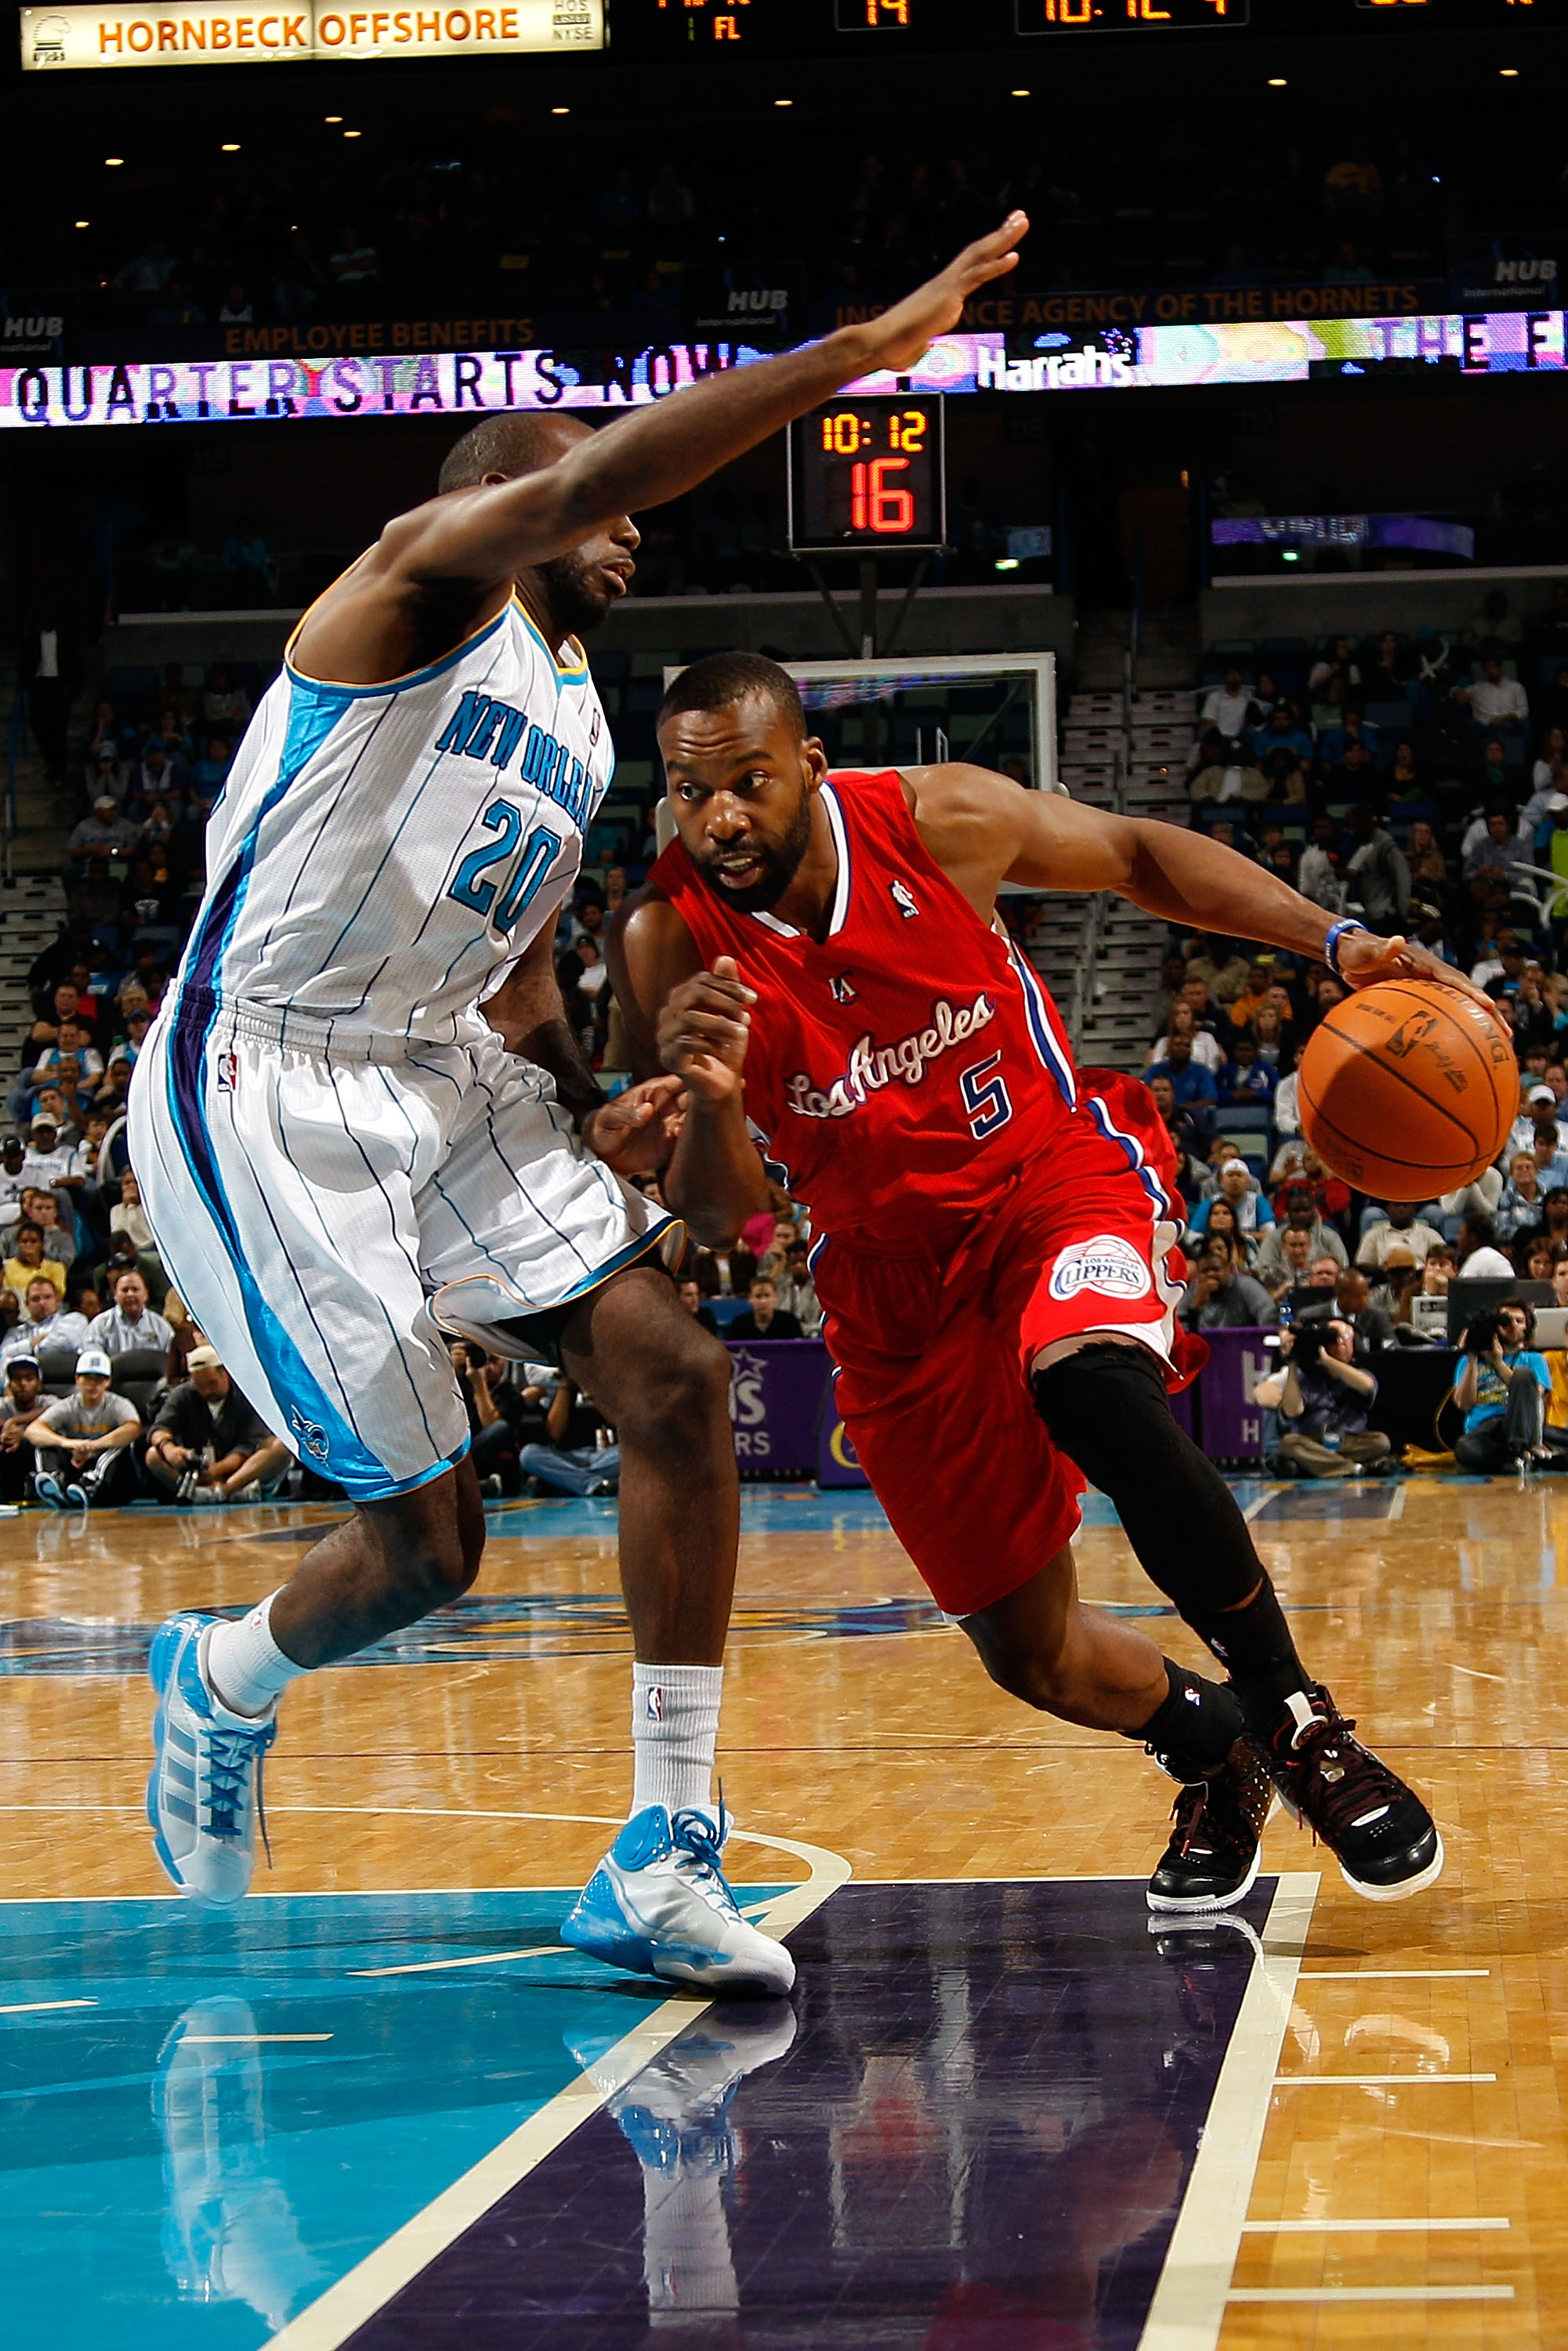 Point guard Baron Davis of the Charlotte Hornets poses for a